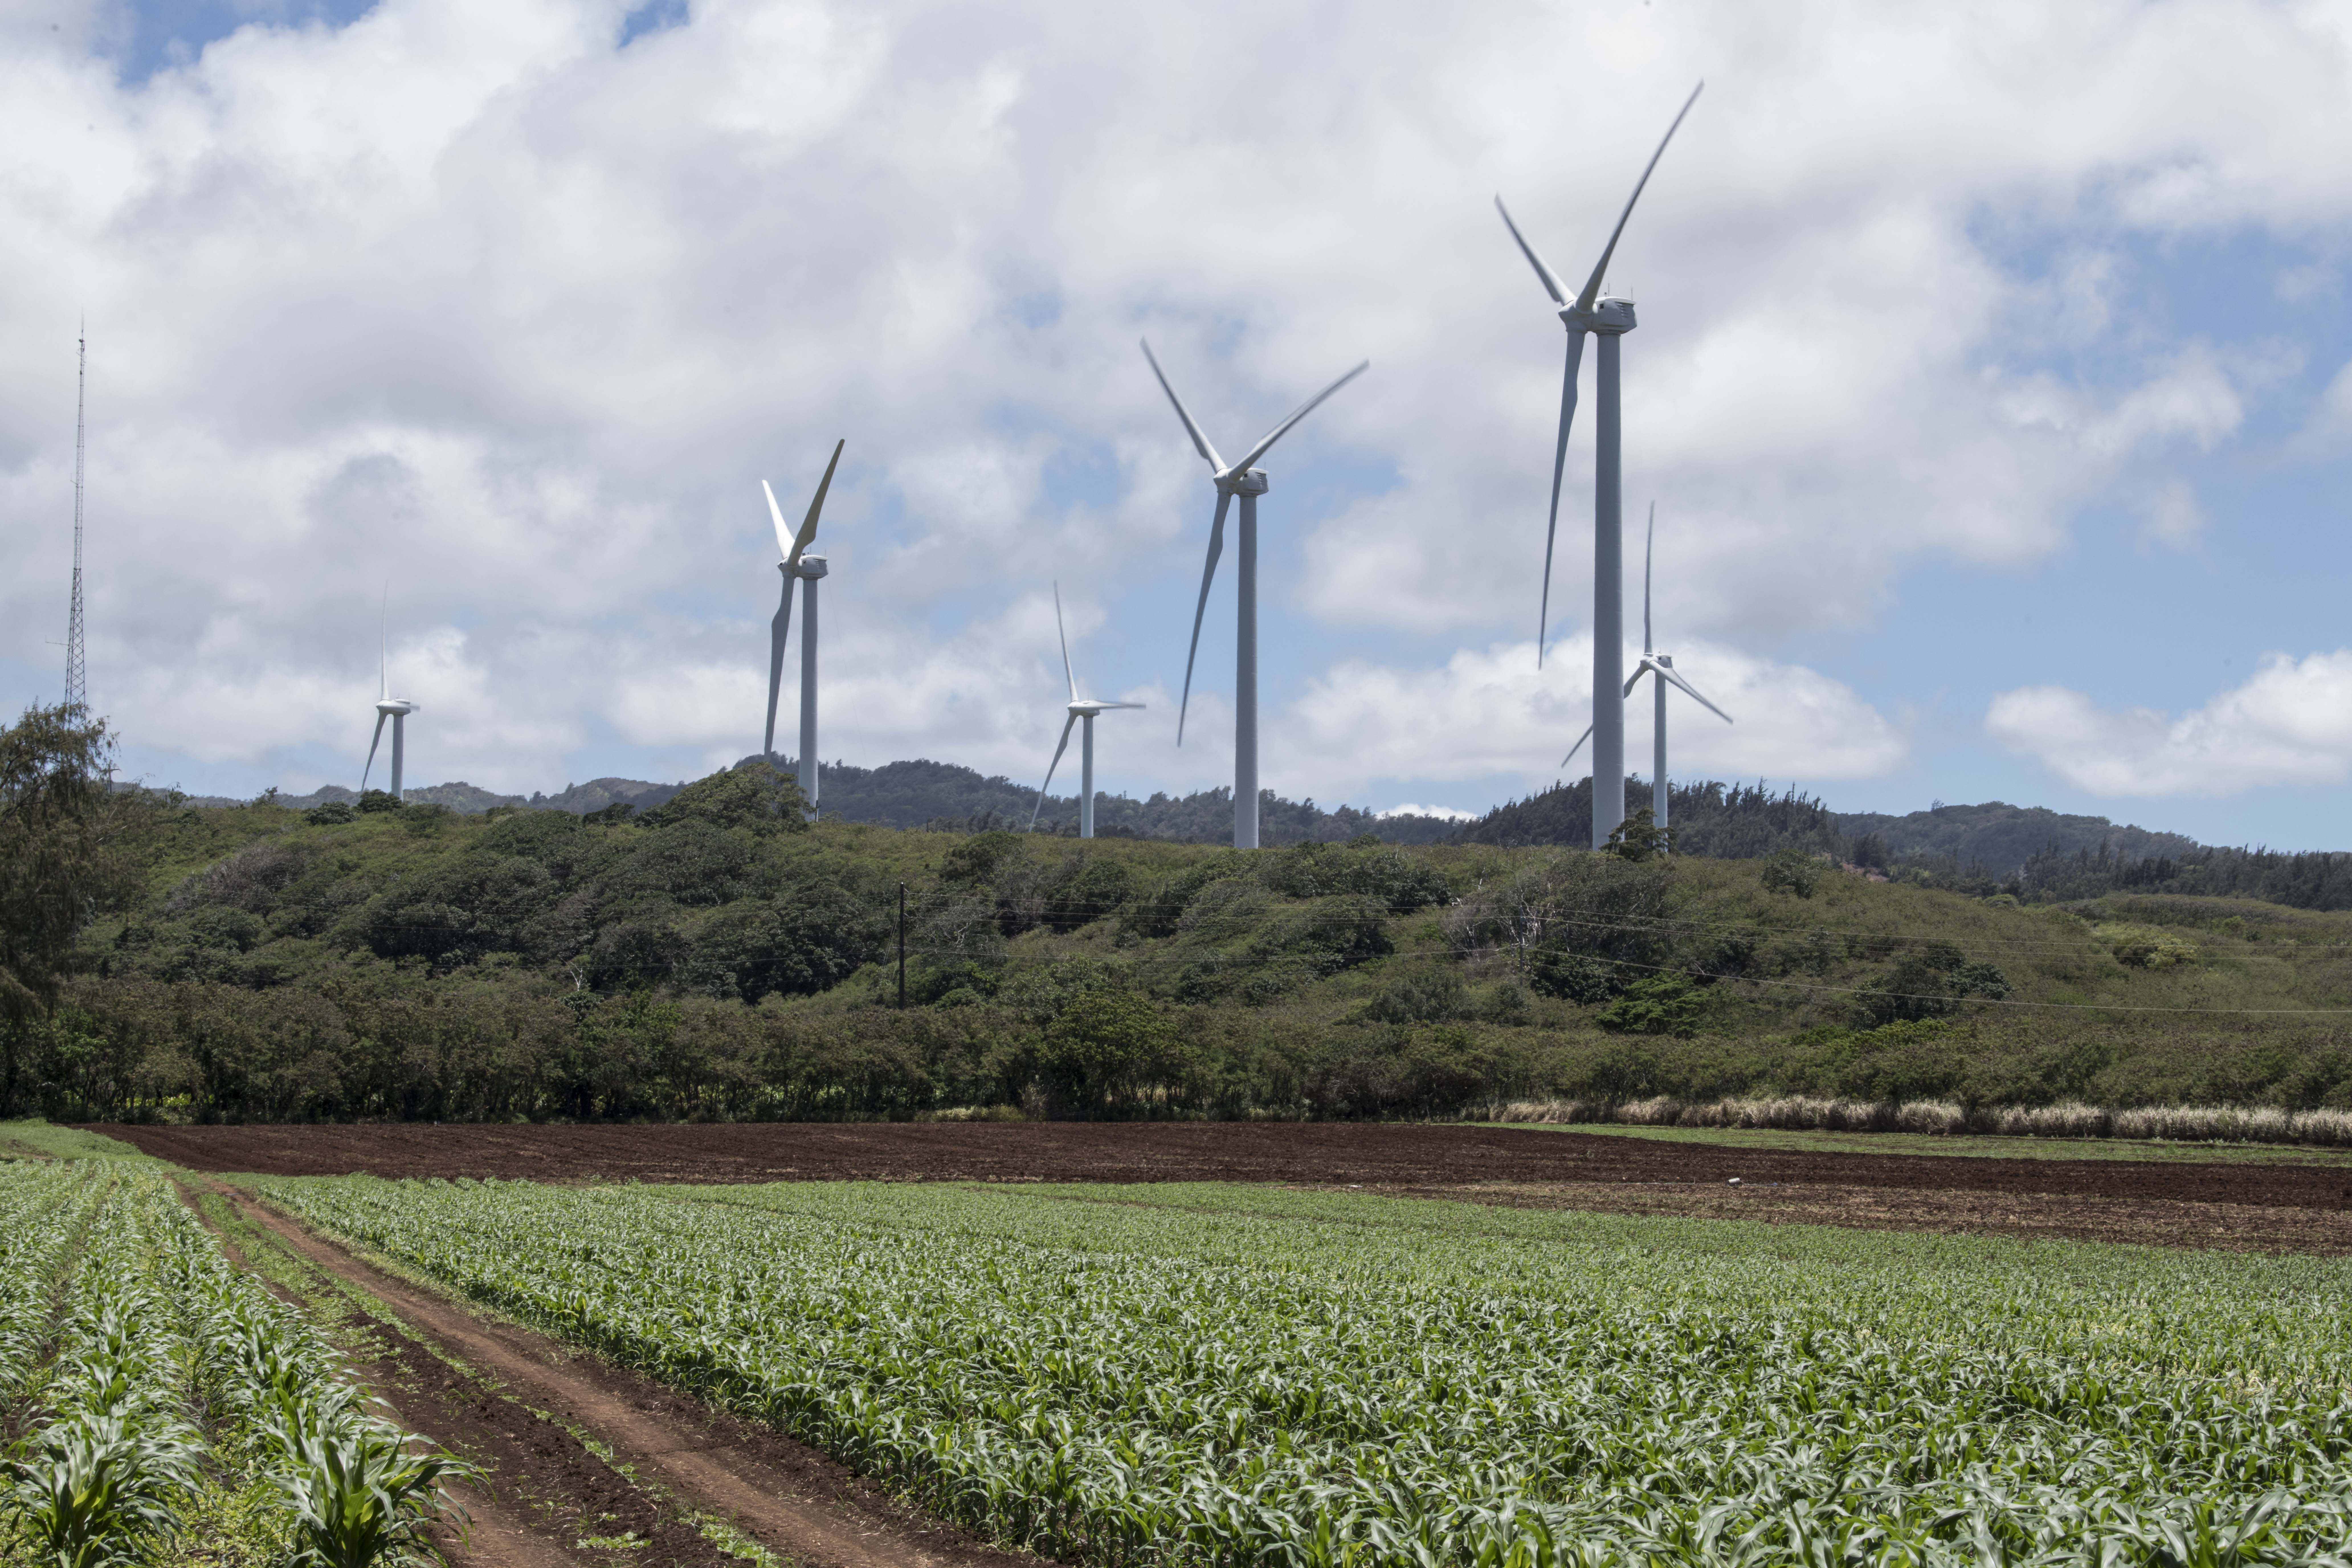 Several land-based wind turbines in front of an agricultural field and green hills